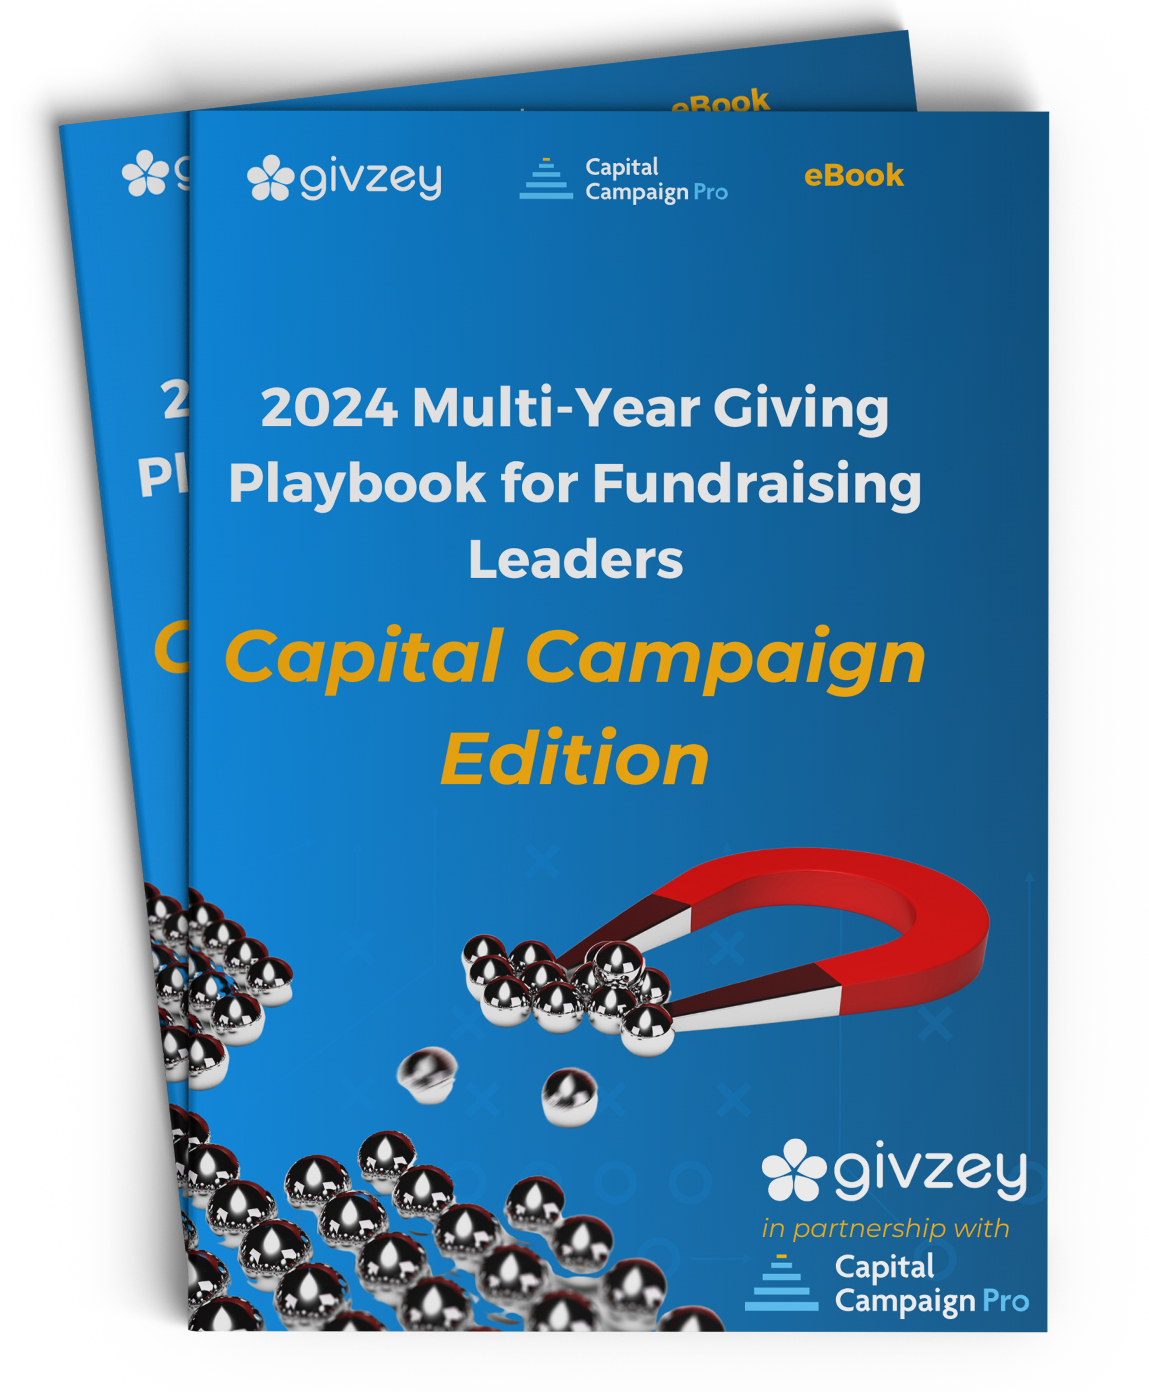 Capital Campaign Edition - 2024 Multi-Year Giving Playbook